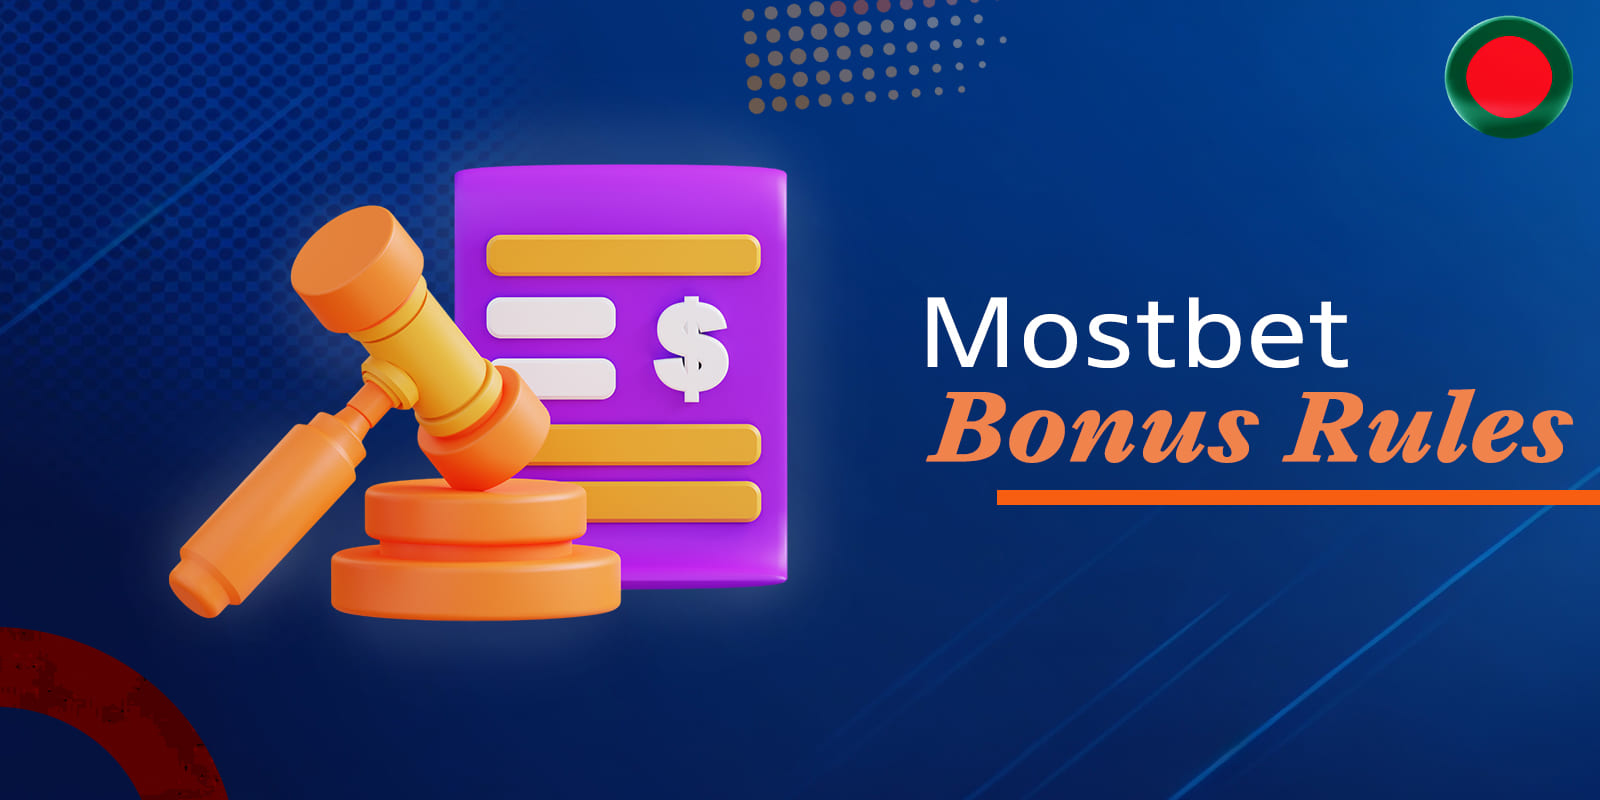 Rules for using Mostbet bonuses